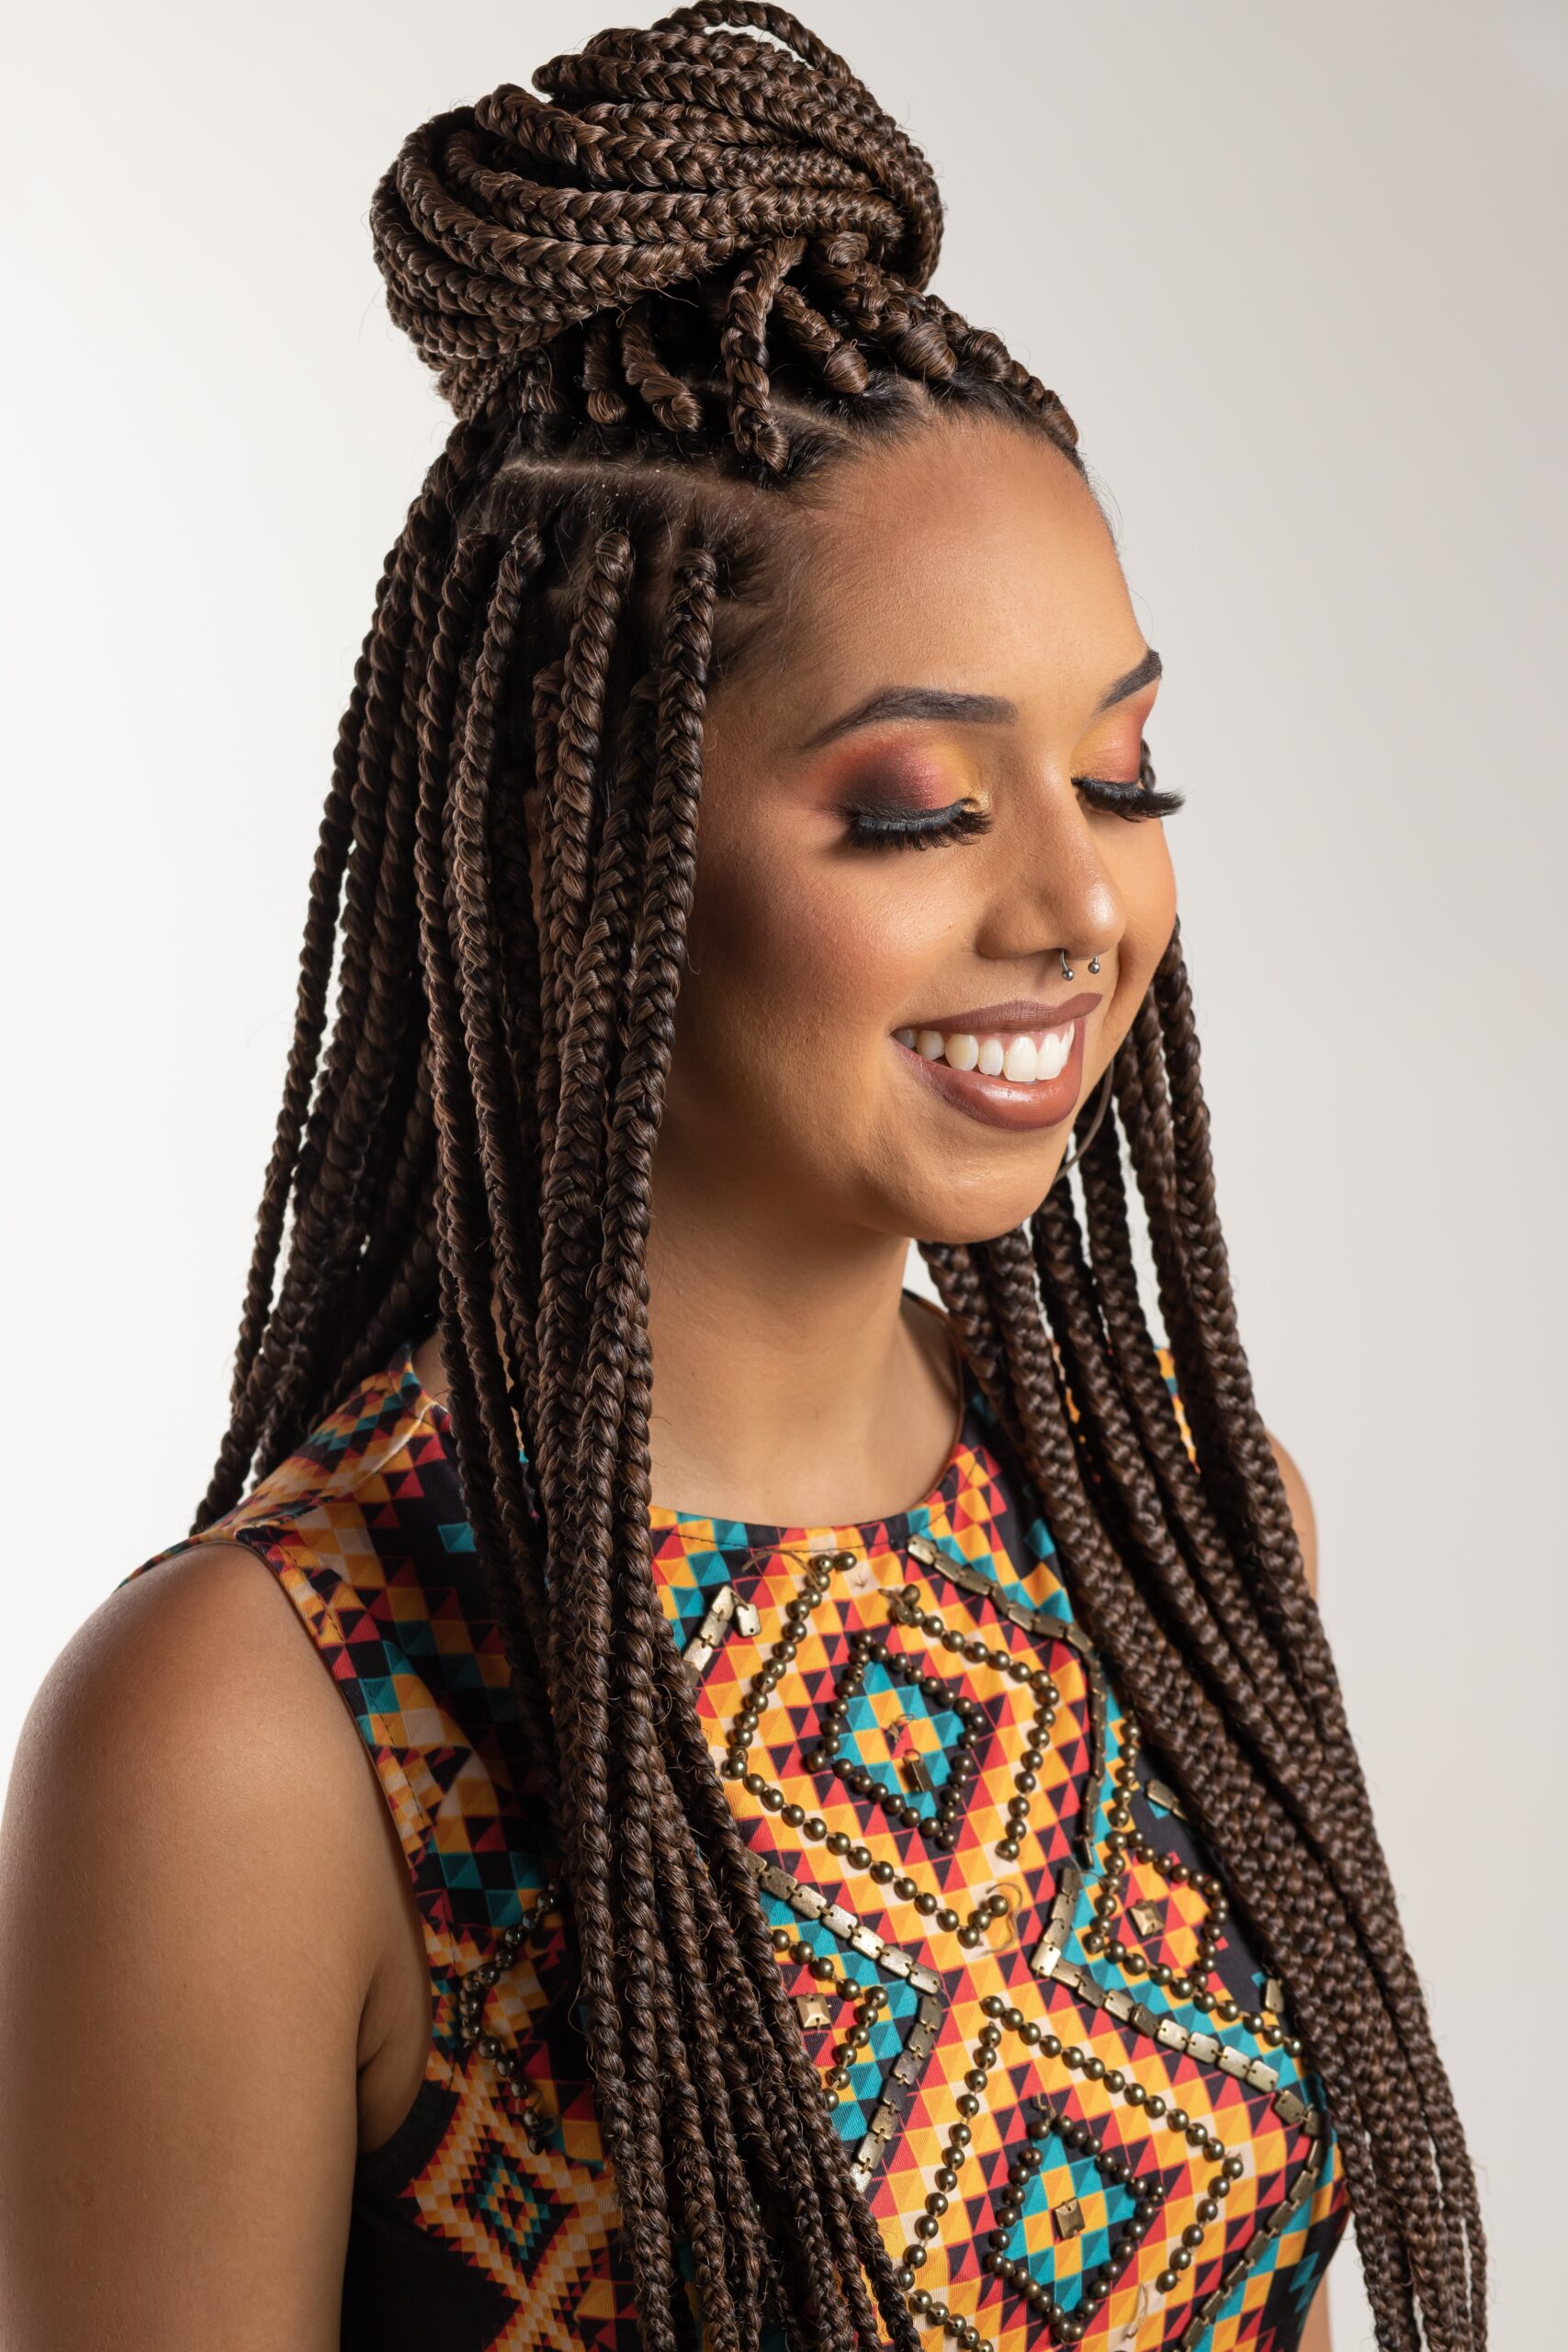 Box Braids: How to Care for Your Hair & Install According to A Stylist